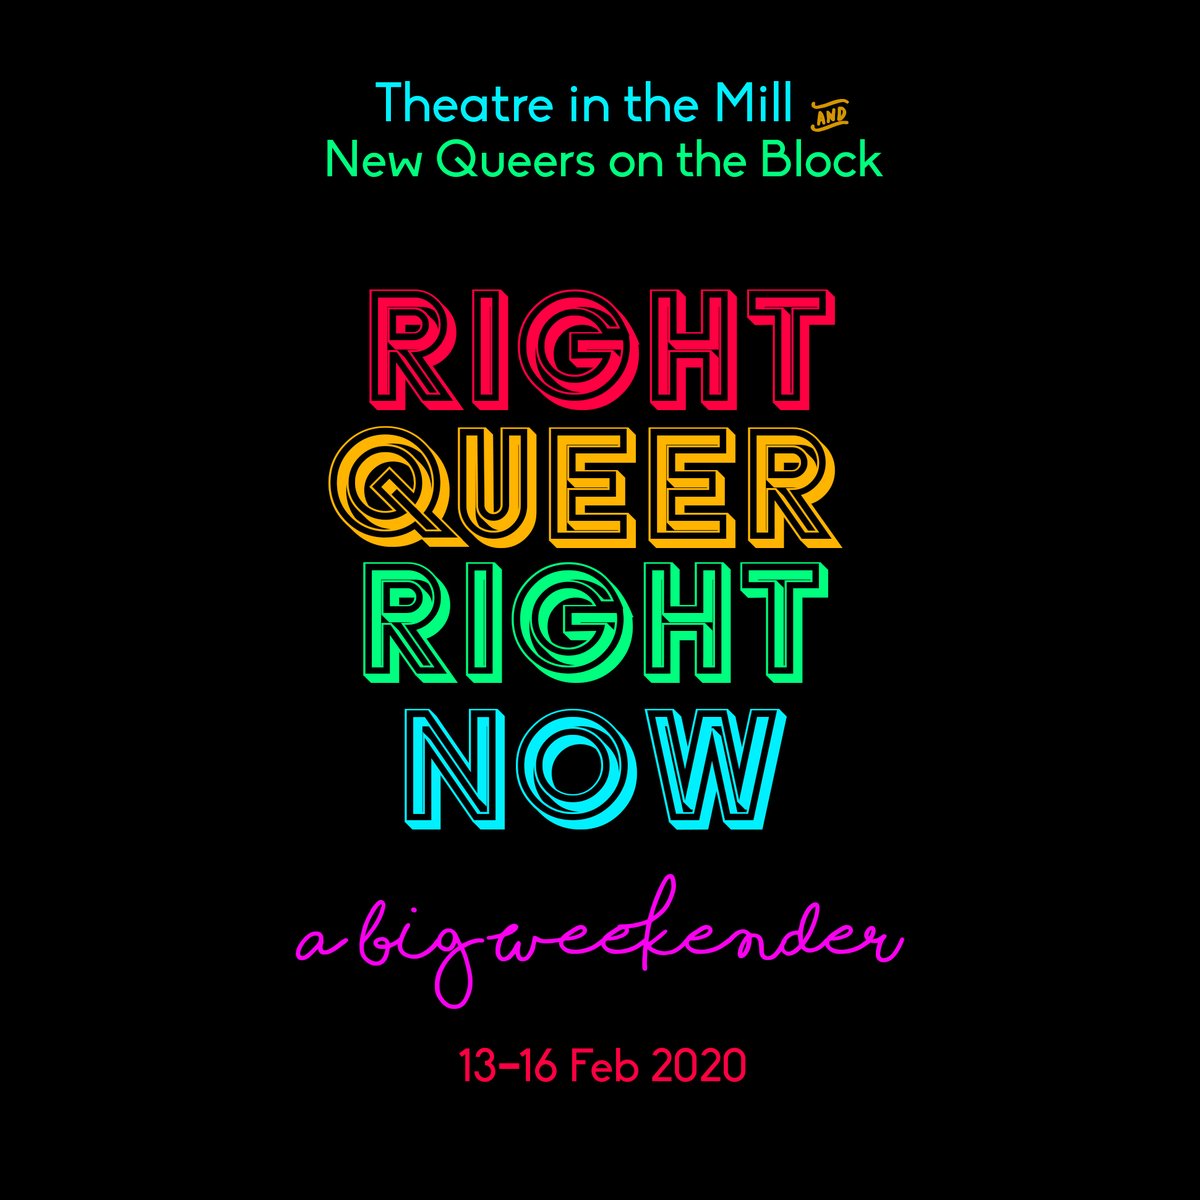 The moment has arrived: tickets for Right Queer Right Now are on sale!

We can't wait to share this brilliant Queer Weekender with you. Buy your tickets now:

theatreinthemill.com/rightqueerrigh…